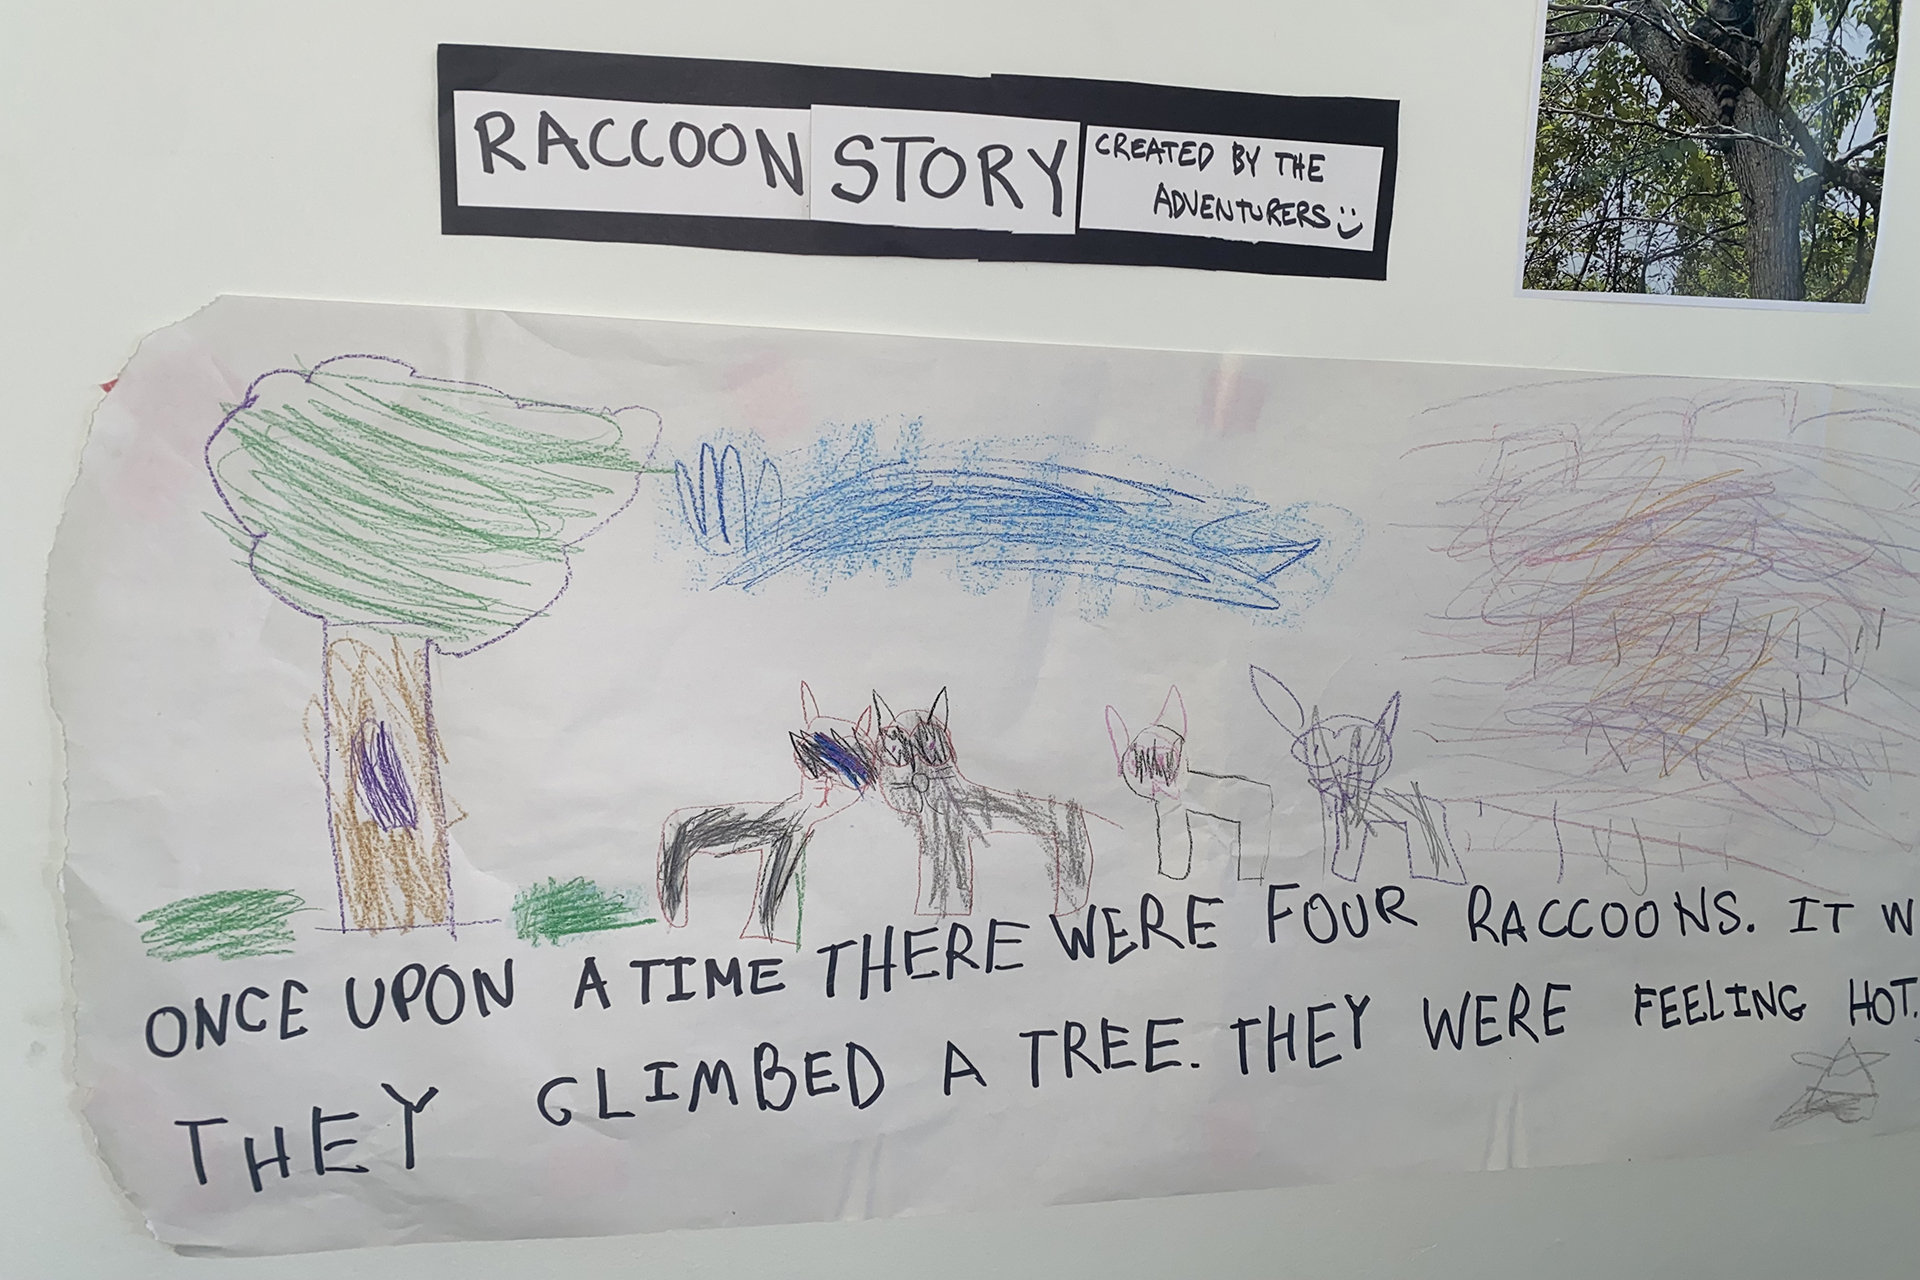 Handwritten raccoon adventure story reading "Once upon a time there were four raccoons...They climbed a tree. They were feeling hot."